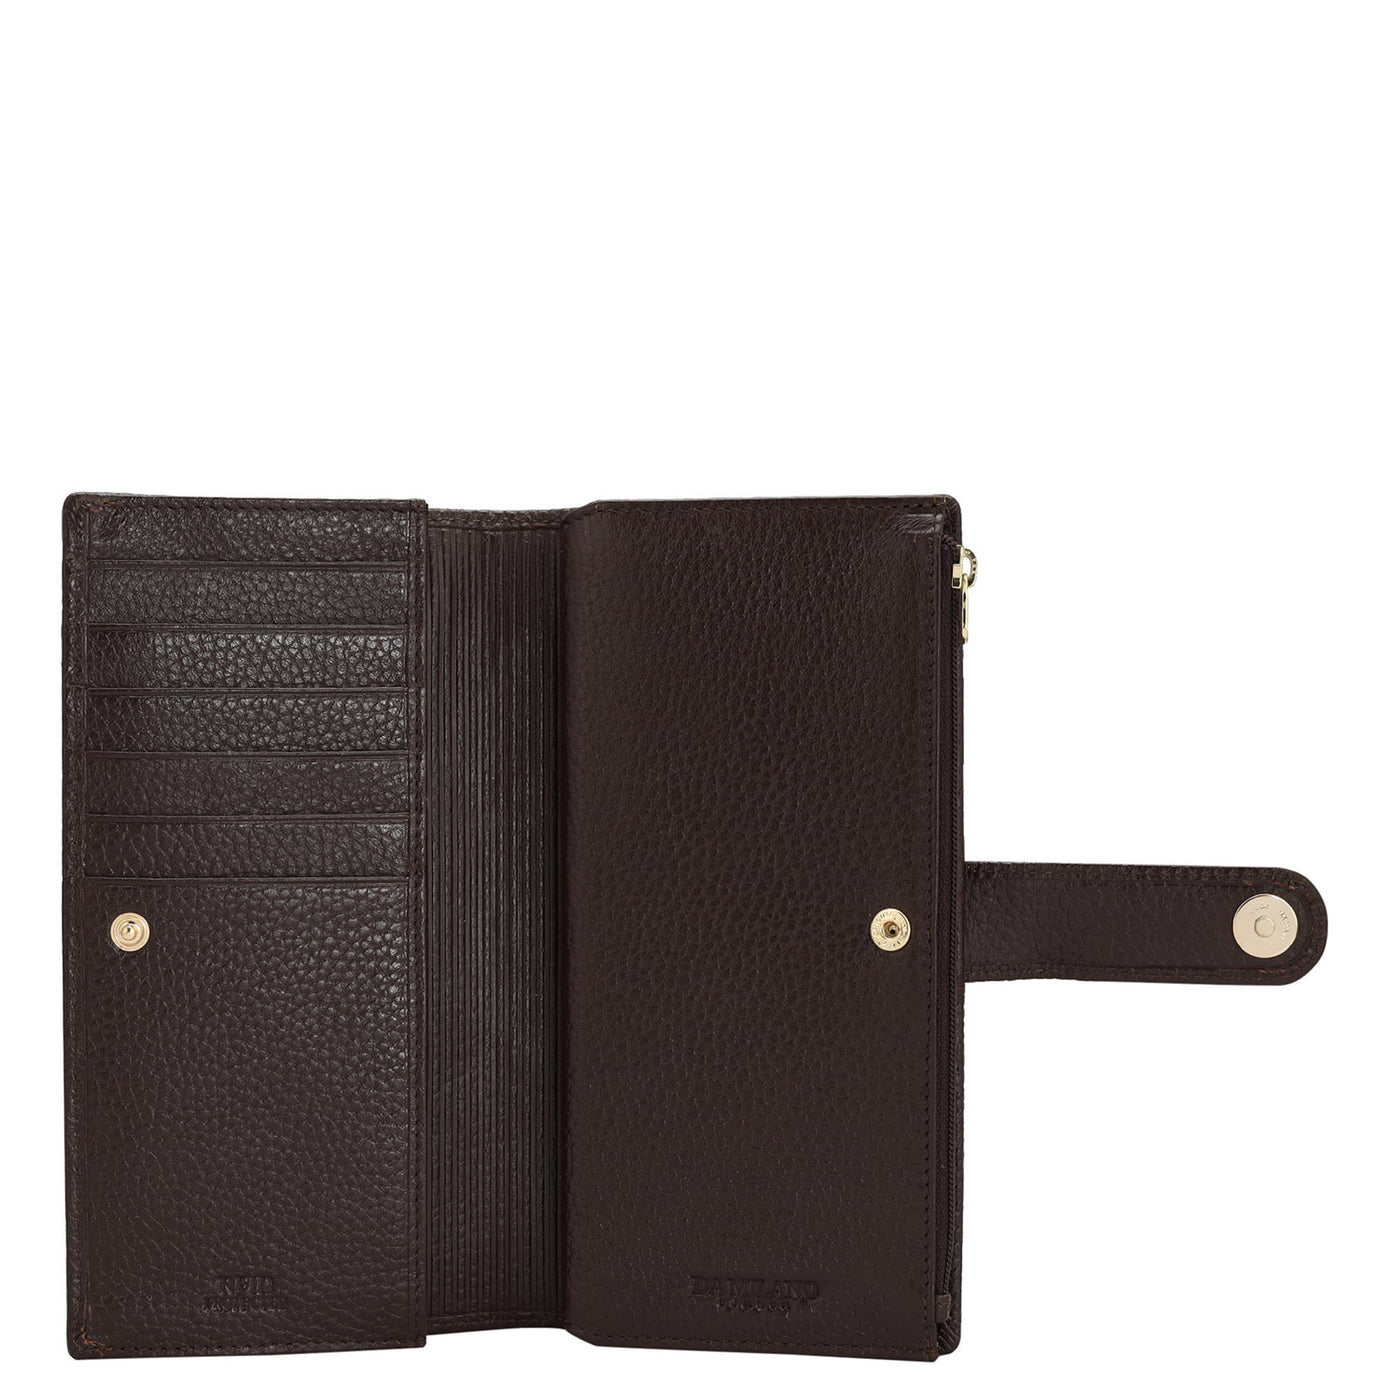 Wax Leather Ladies Wallet - Chocolate